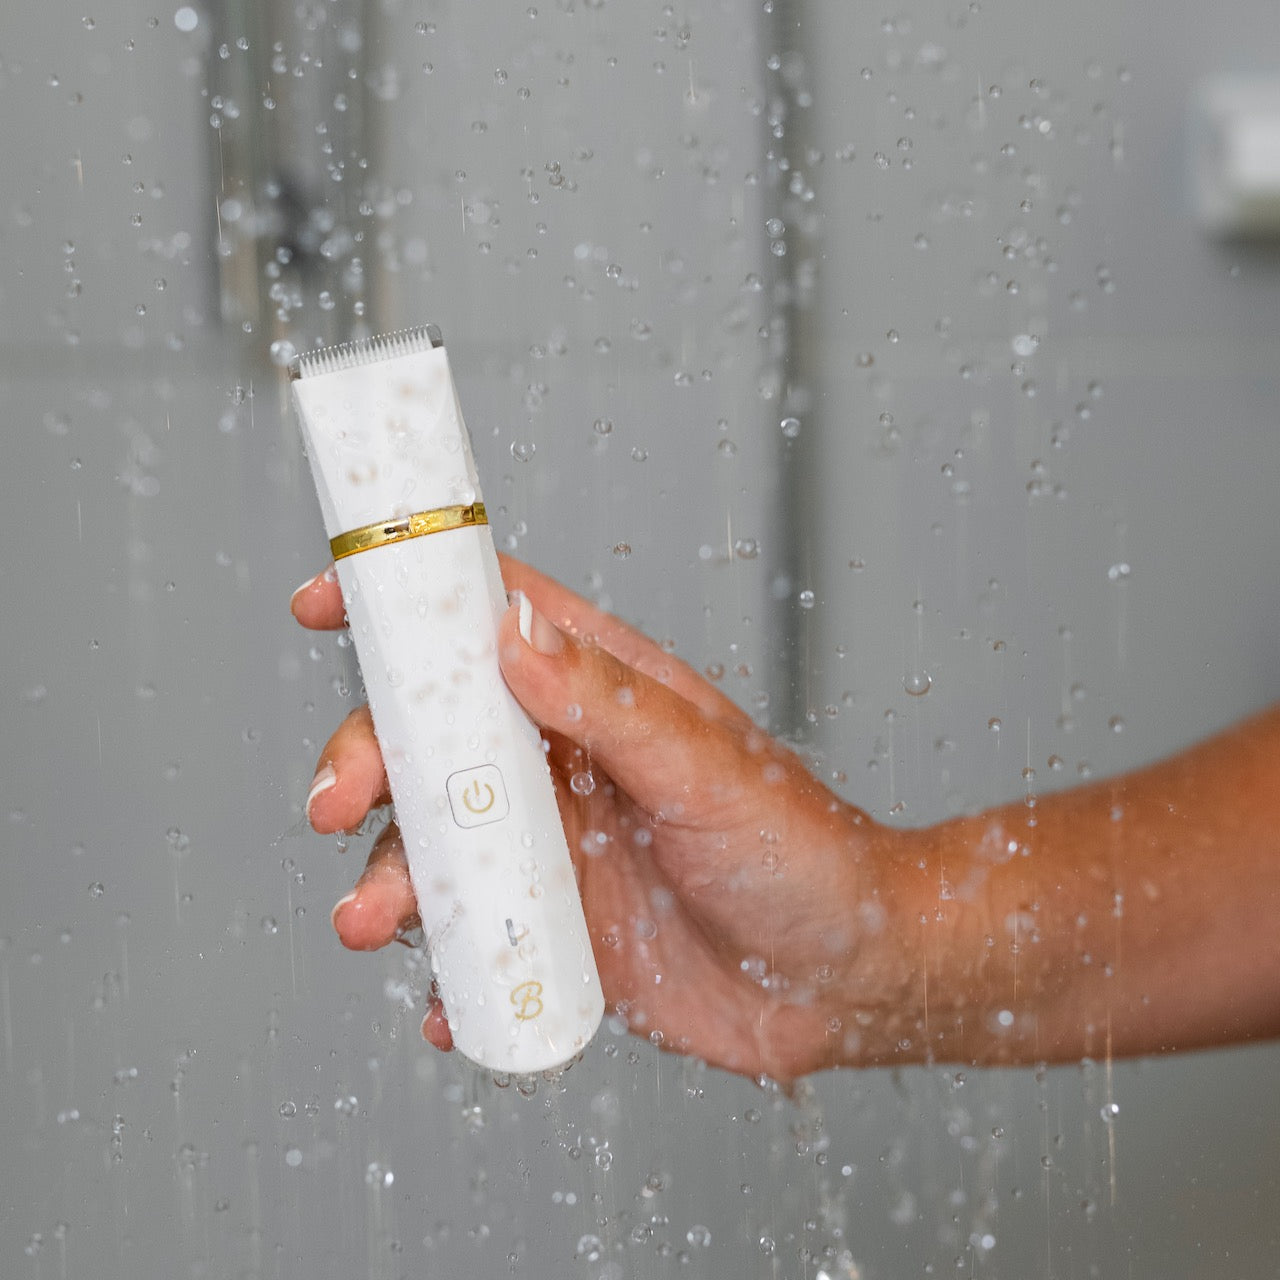 A Bushbalm trimmer held by a hand model in a shower setting.